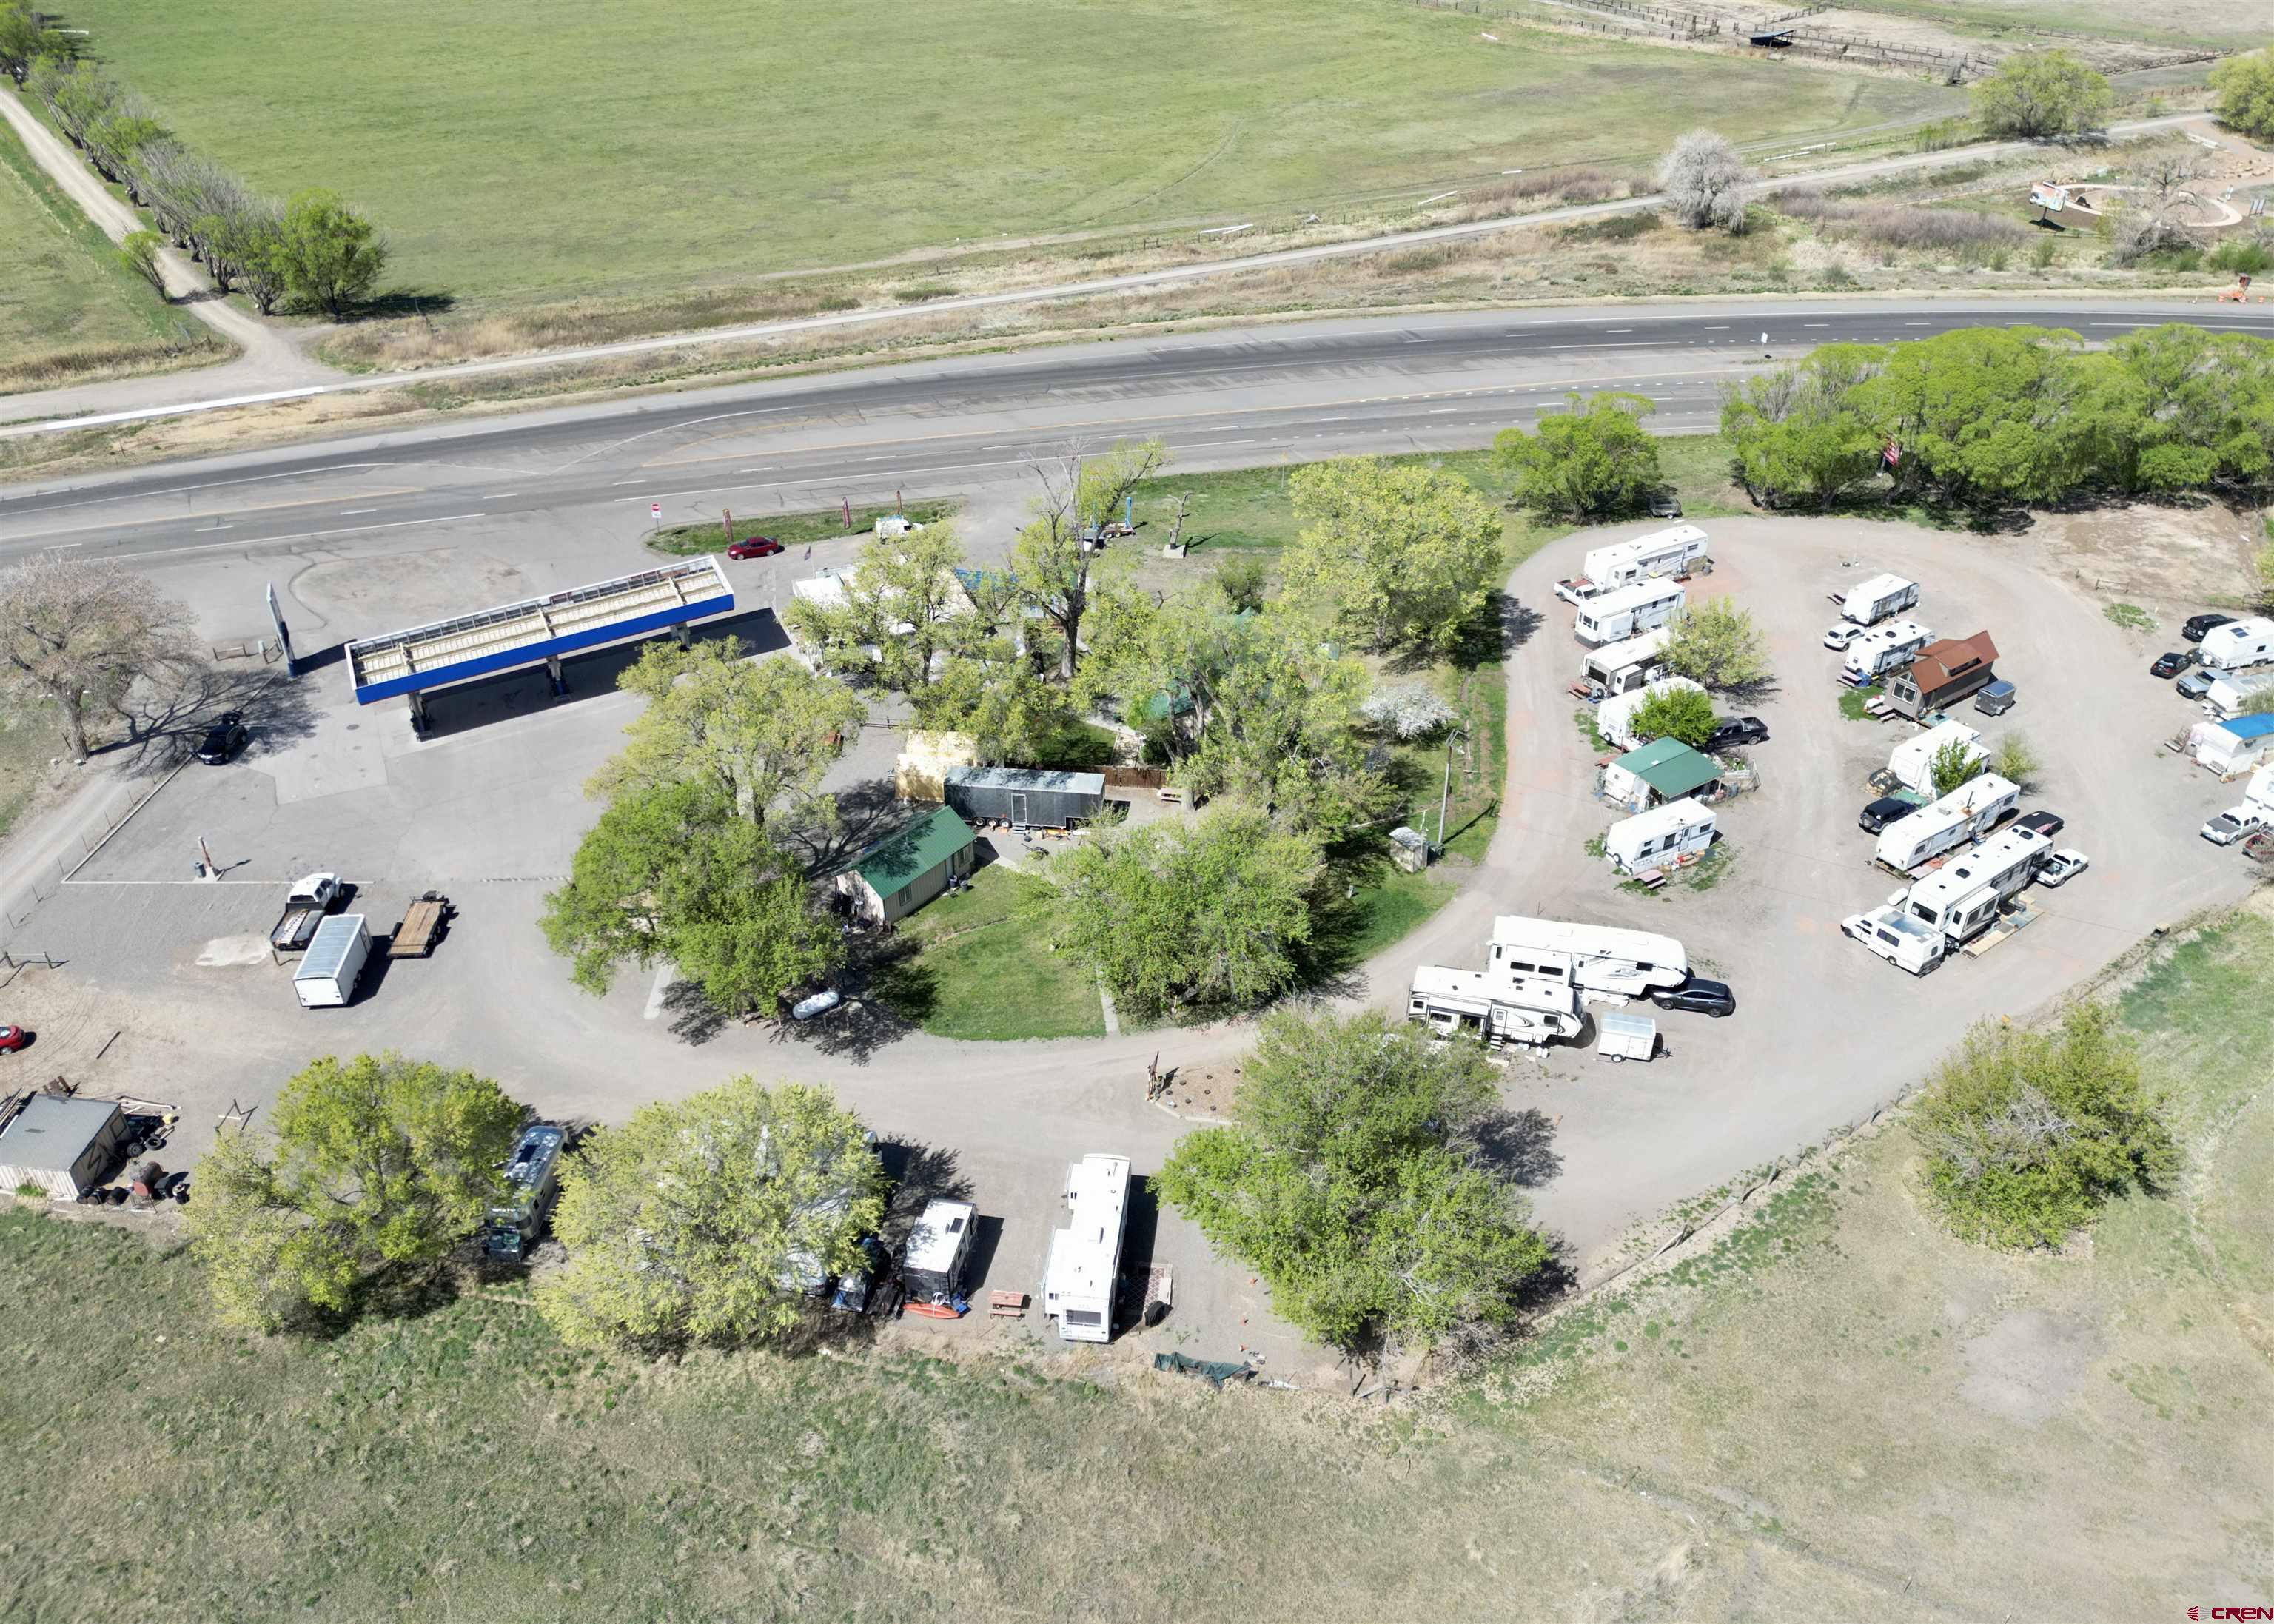 Tremendous CASH FLOW Opportunity Awaits! The Hangin Tree RV Park with Gas Station and Convenience Store with Deli  has been a local fixture for over 40 years.  The property consists of:    -   3.758 Acres.    -   25 RV Sites.      -   A 1,590 sq.ft. 2+bedroom and 3 bath Residence with Fence Enclosure.    -   A Deli/Convenience Store.    -   A Canopy over the Gas Pumps.      -   Shower/Laundry Building.      -   An Office Building.       -   2 - Storage Buildings.     -   2 Car Parking Canopy.     -   Propane Dispenser.      -   The Traffic Count has exploded in recent years.    -   Financials Available with NDA.    -   Would consider joint venture.